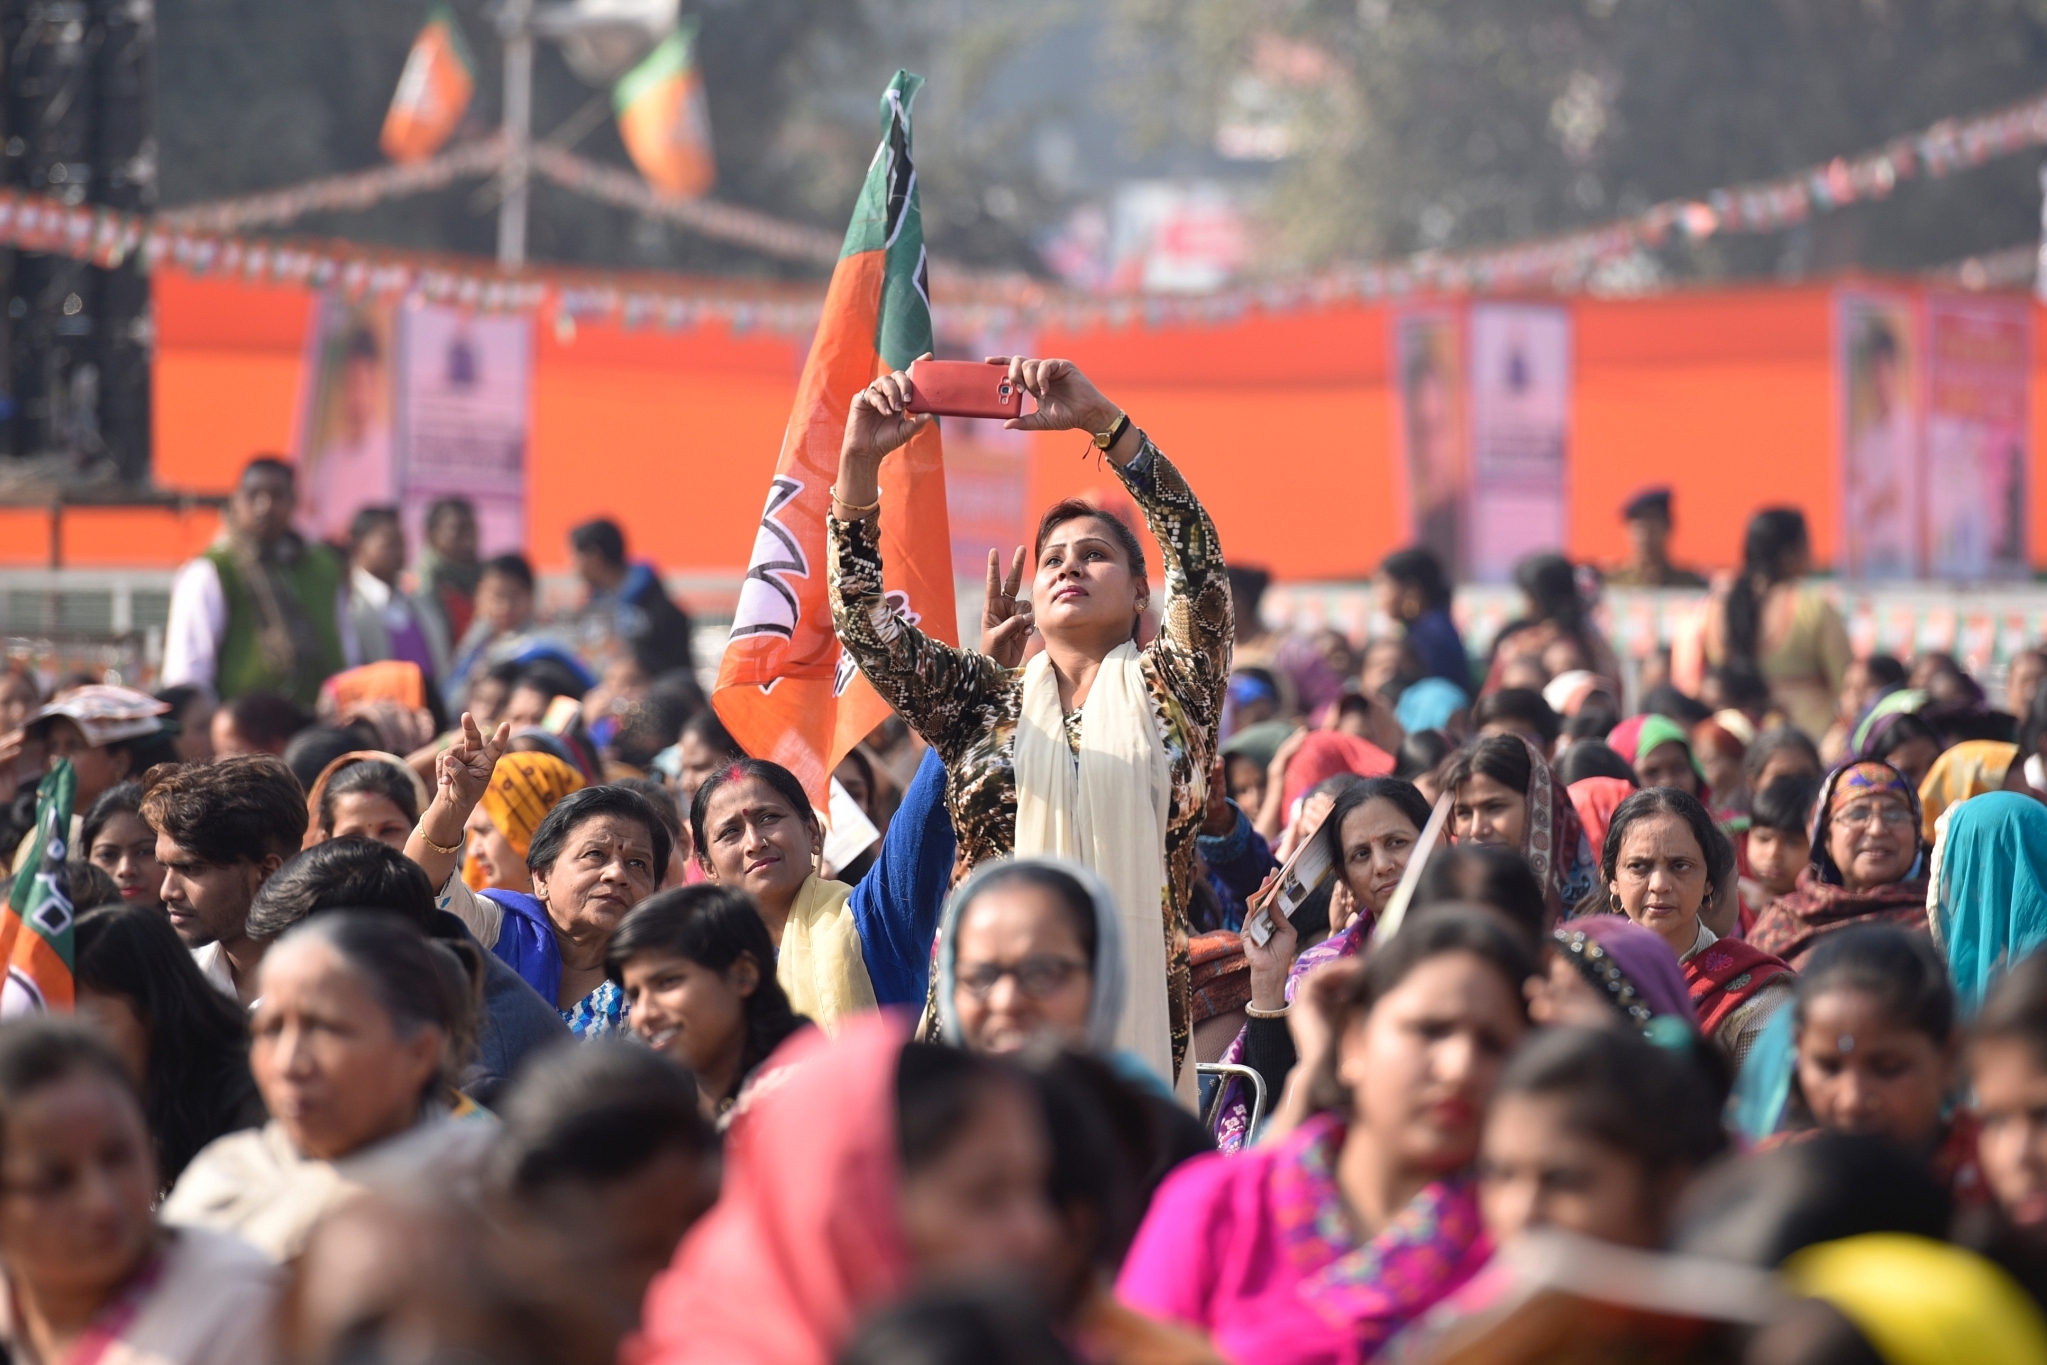 Women BJP supporters at a rally. (Sanchit Khanna/Hindustan Times via GettyImages)